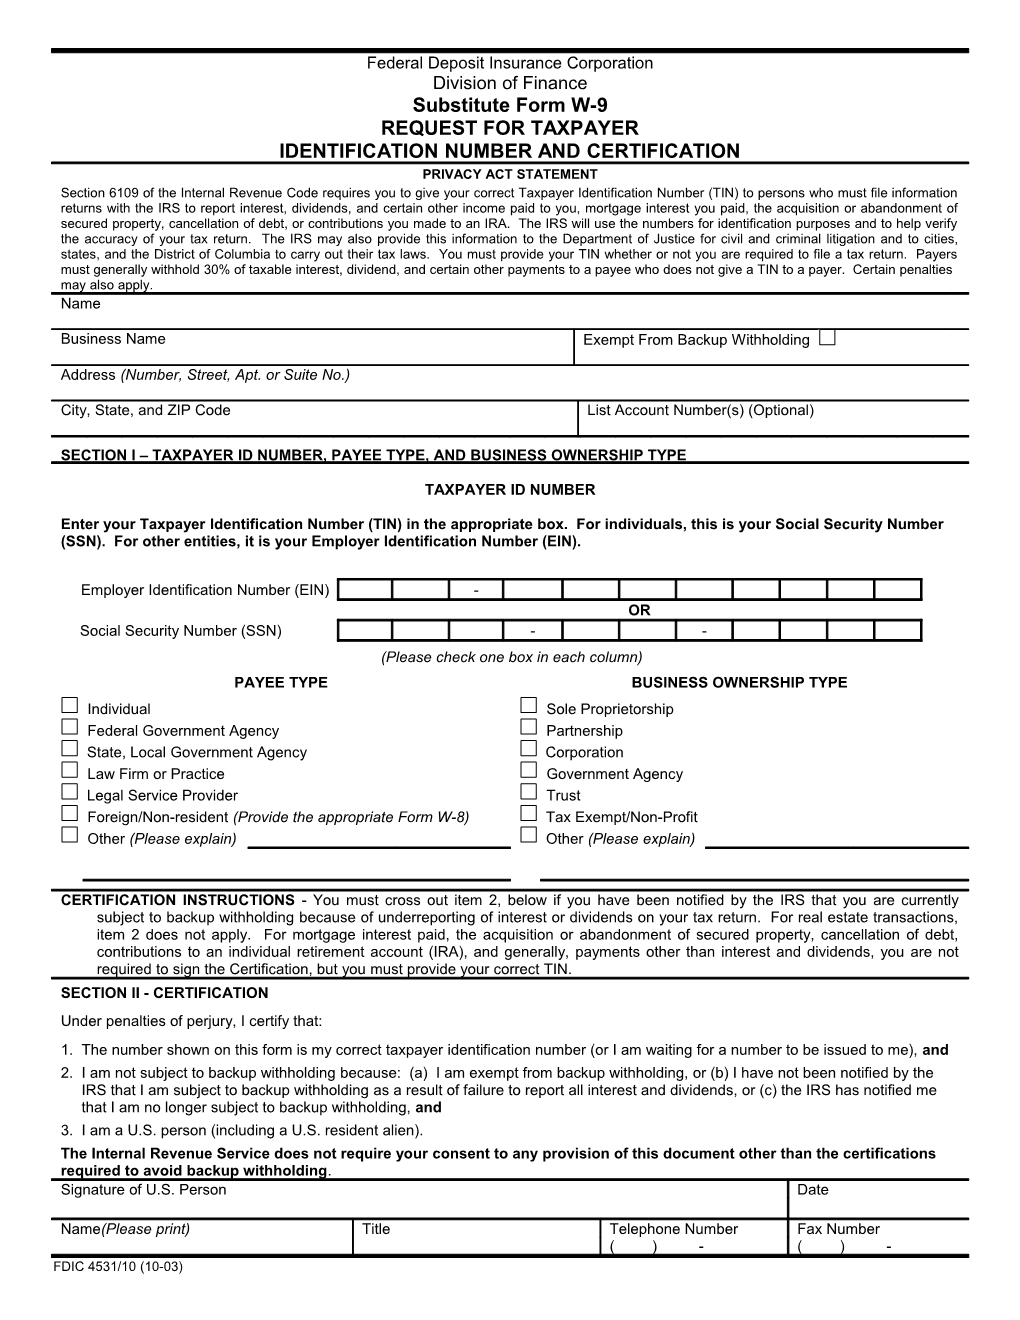 FDIC 4531/10, Substitute Form W-9, Request for Taxpayer Identification Number and Certification